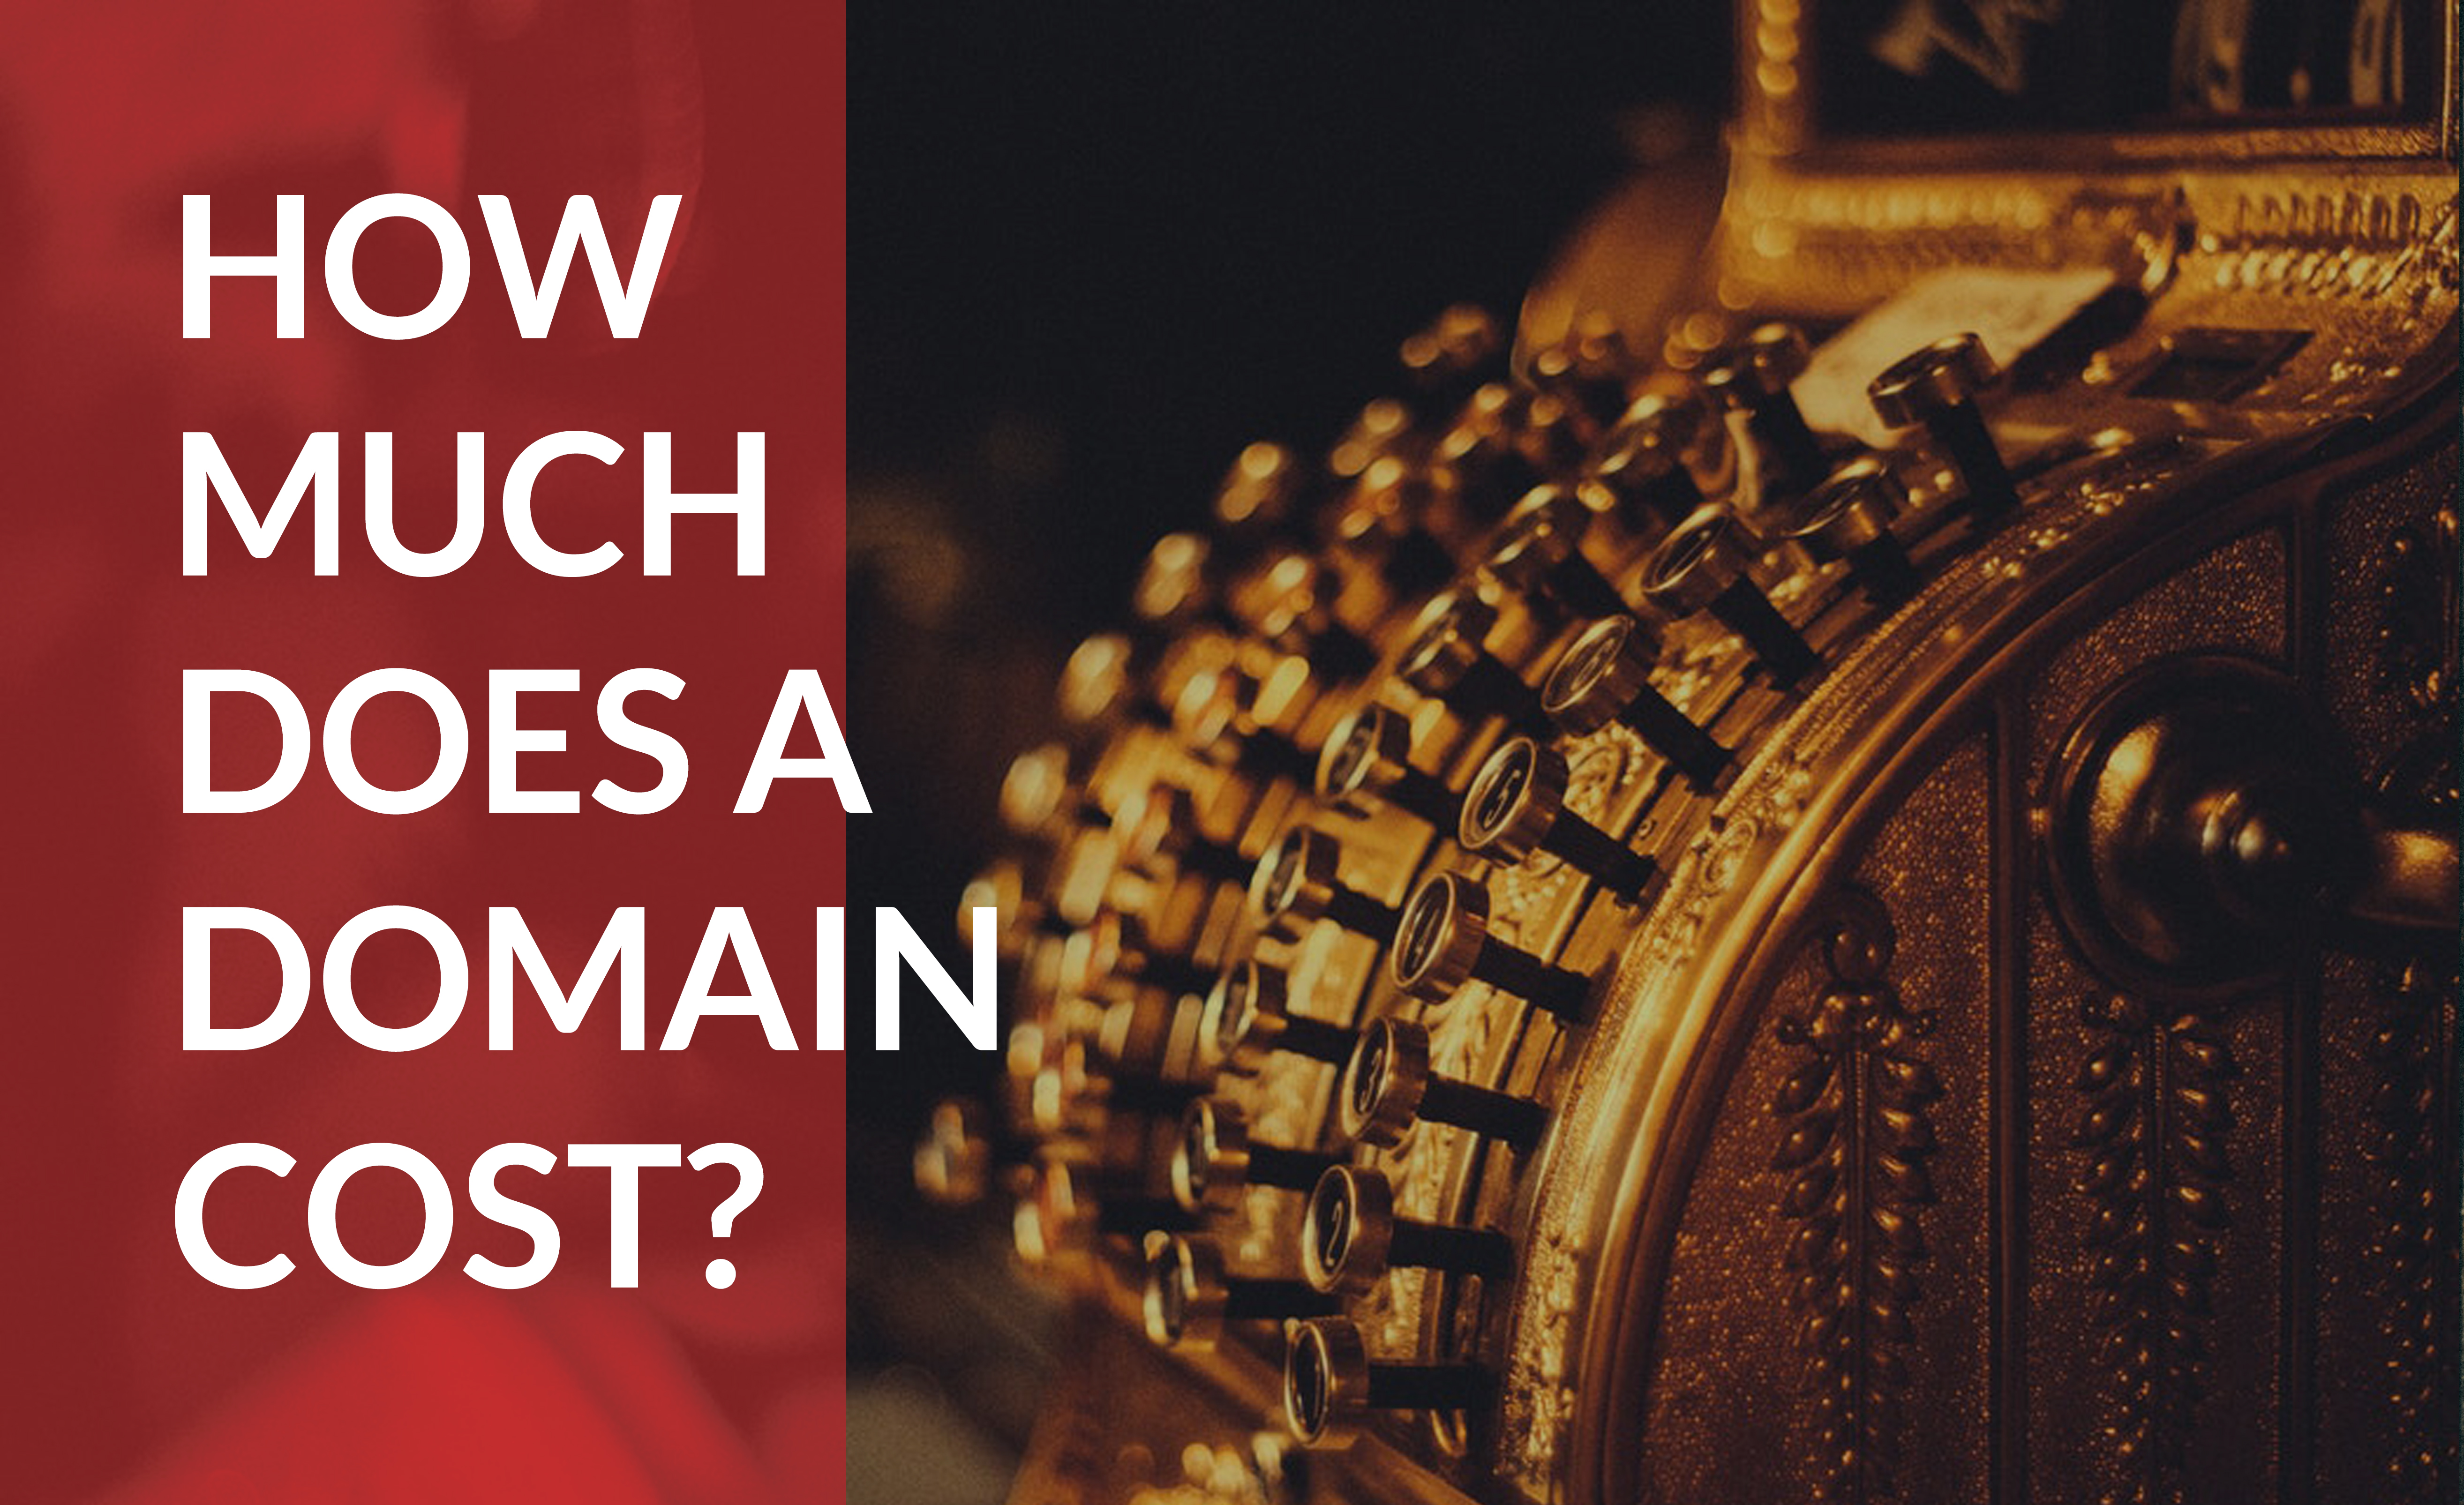 Find out the typical cost of a domain name to start planning to purchase your own.